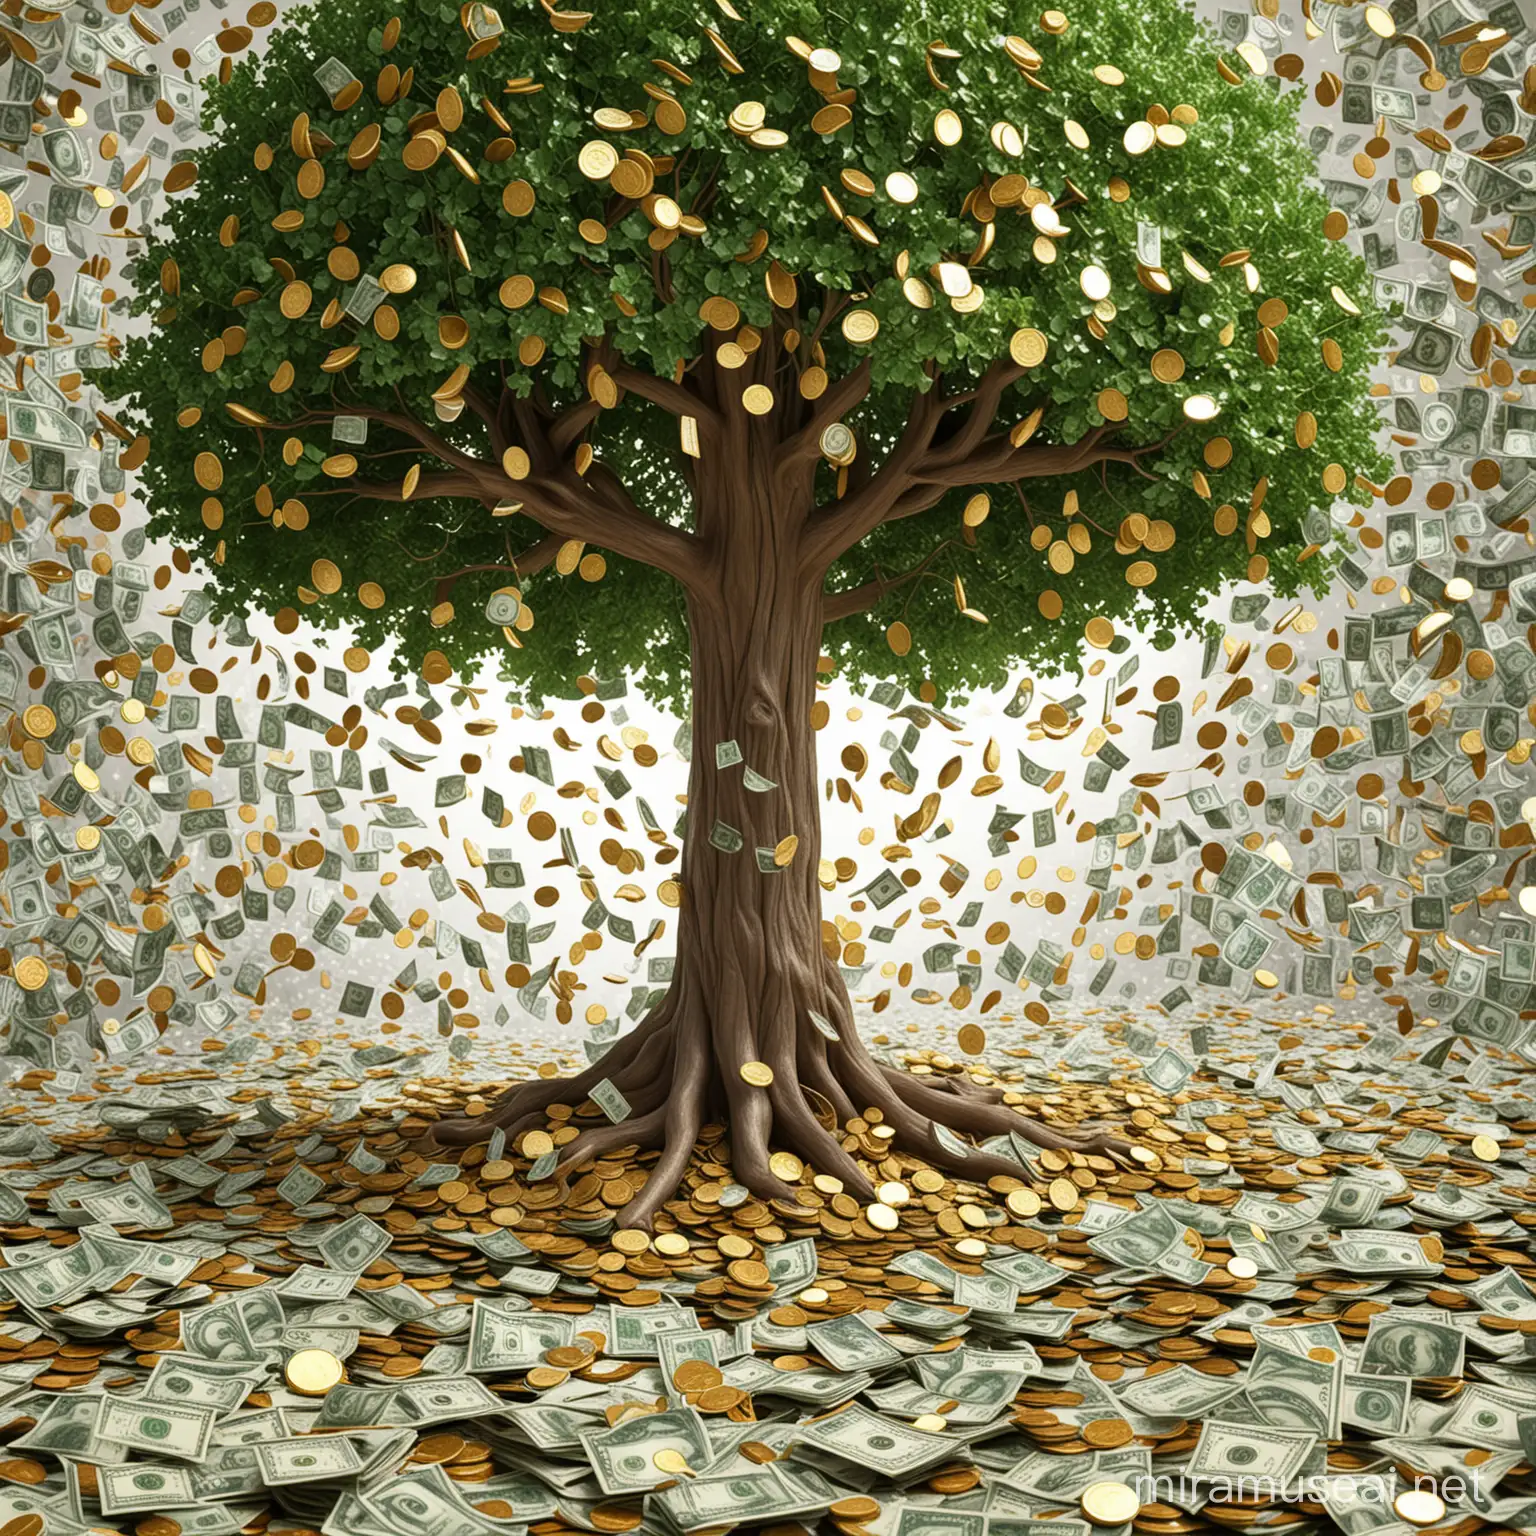 Imagine a majestic tree standing tall, its trunk composed of meticulously stacked golden coins that gleam in the light, symbolizing prosperity and abundance. The branches of the tree are lush with green dollar bills instead of traditional leaves, creating a striking contrast of opulence against the white background that accentuates the vibrant colors of the composition.   As the tree flourishes, some dollar bills flutter to the ground like falling leaves, gently descending in a graceful dance of wealth and fortune. A few bills are scattered on the ground, further emphasizing the theme of financial growth and success.   The overall composition radiates a sense of vitality and opulence, with each element meticulously detailed and rendered in high resolution to capture the intricate textures and colors of the golden coins and green dollar bills. The symbolic representation of wealth growth and prosperity is vividly depicted through the imagery of the flourishing tree, where money literally grows on its branches, creating a visual metaphor for abundance and financial success.   This visually stunning and conceptually rich artwork encapsulates the essence of prosperity and economic growth, inviting viewers to contemplate the transformative power of wealth and the beauty of abundance in a dynamic and symbolic way, 32k render, hyperrealistic, detailed.